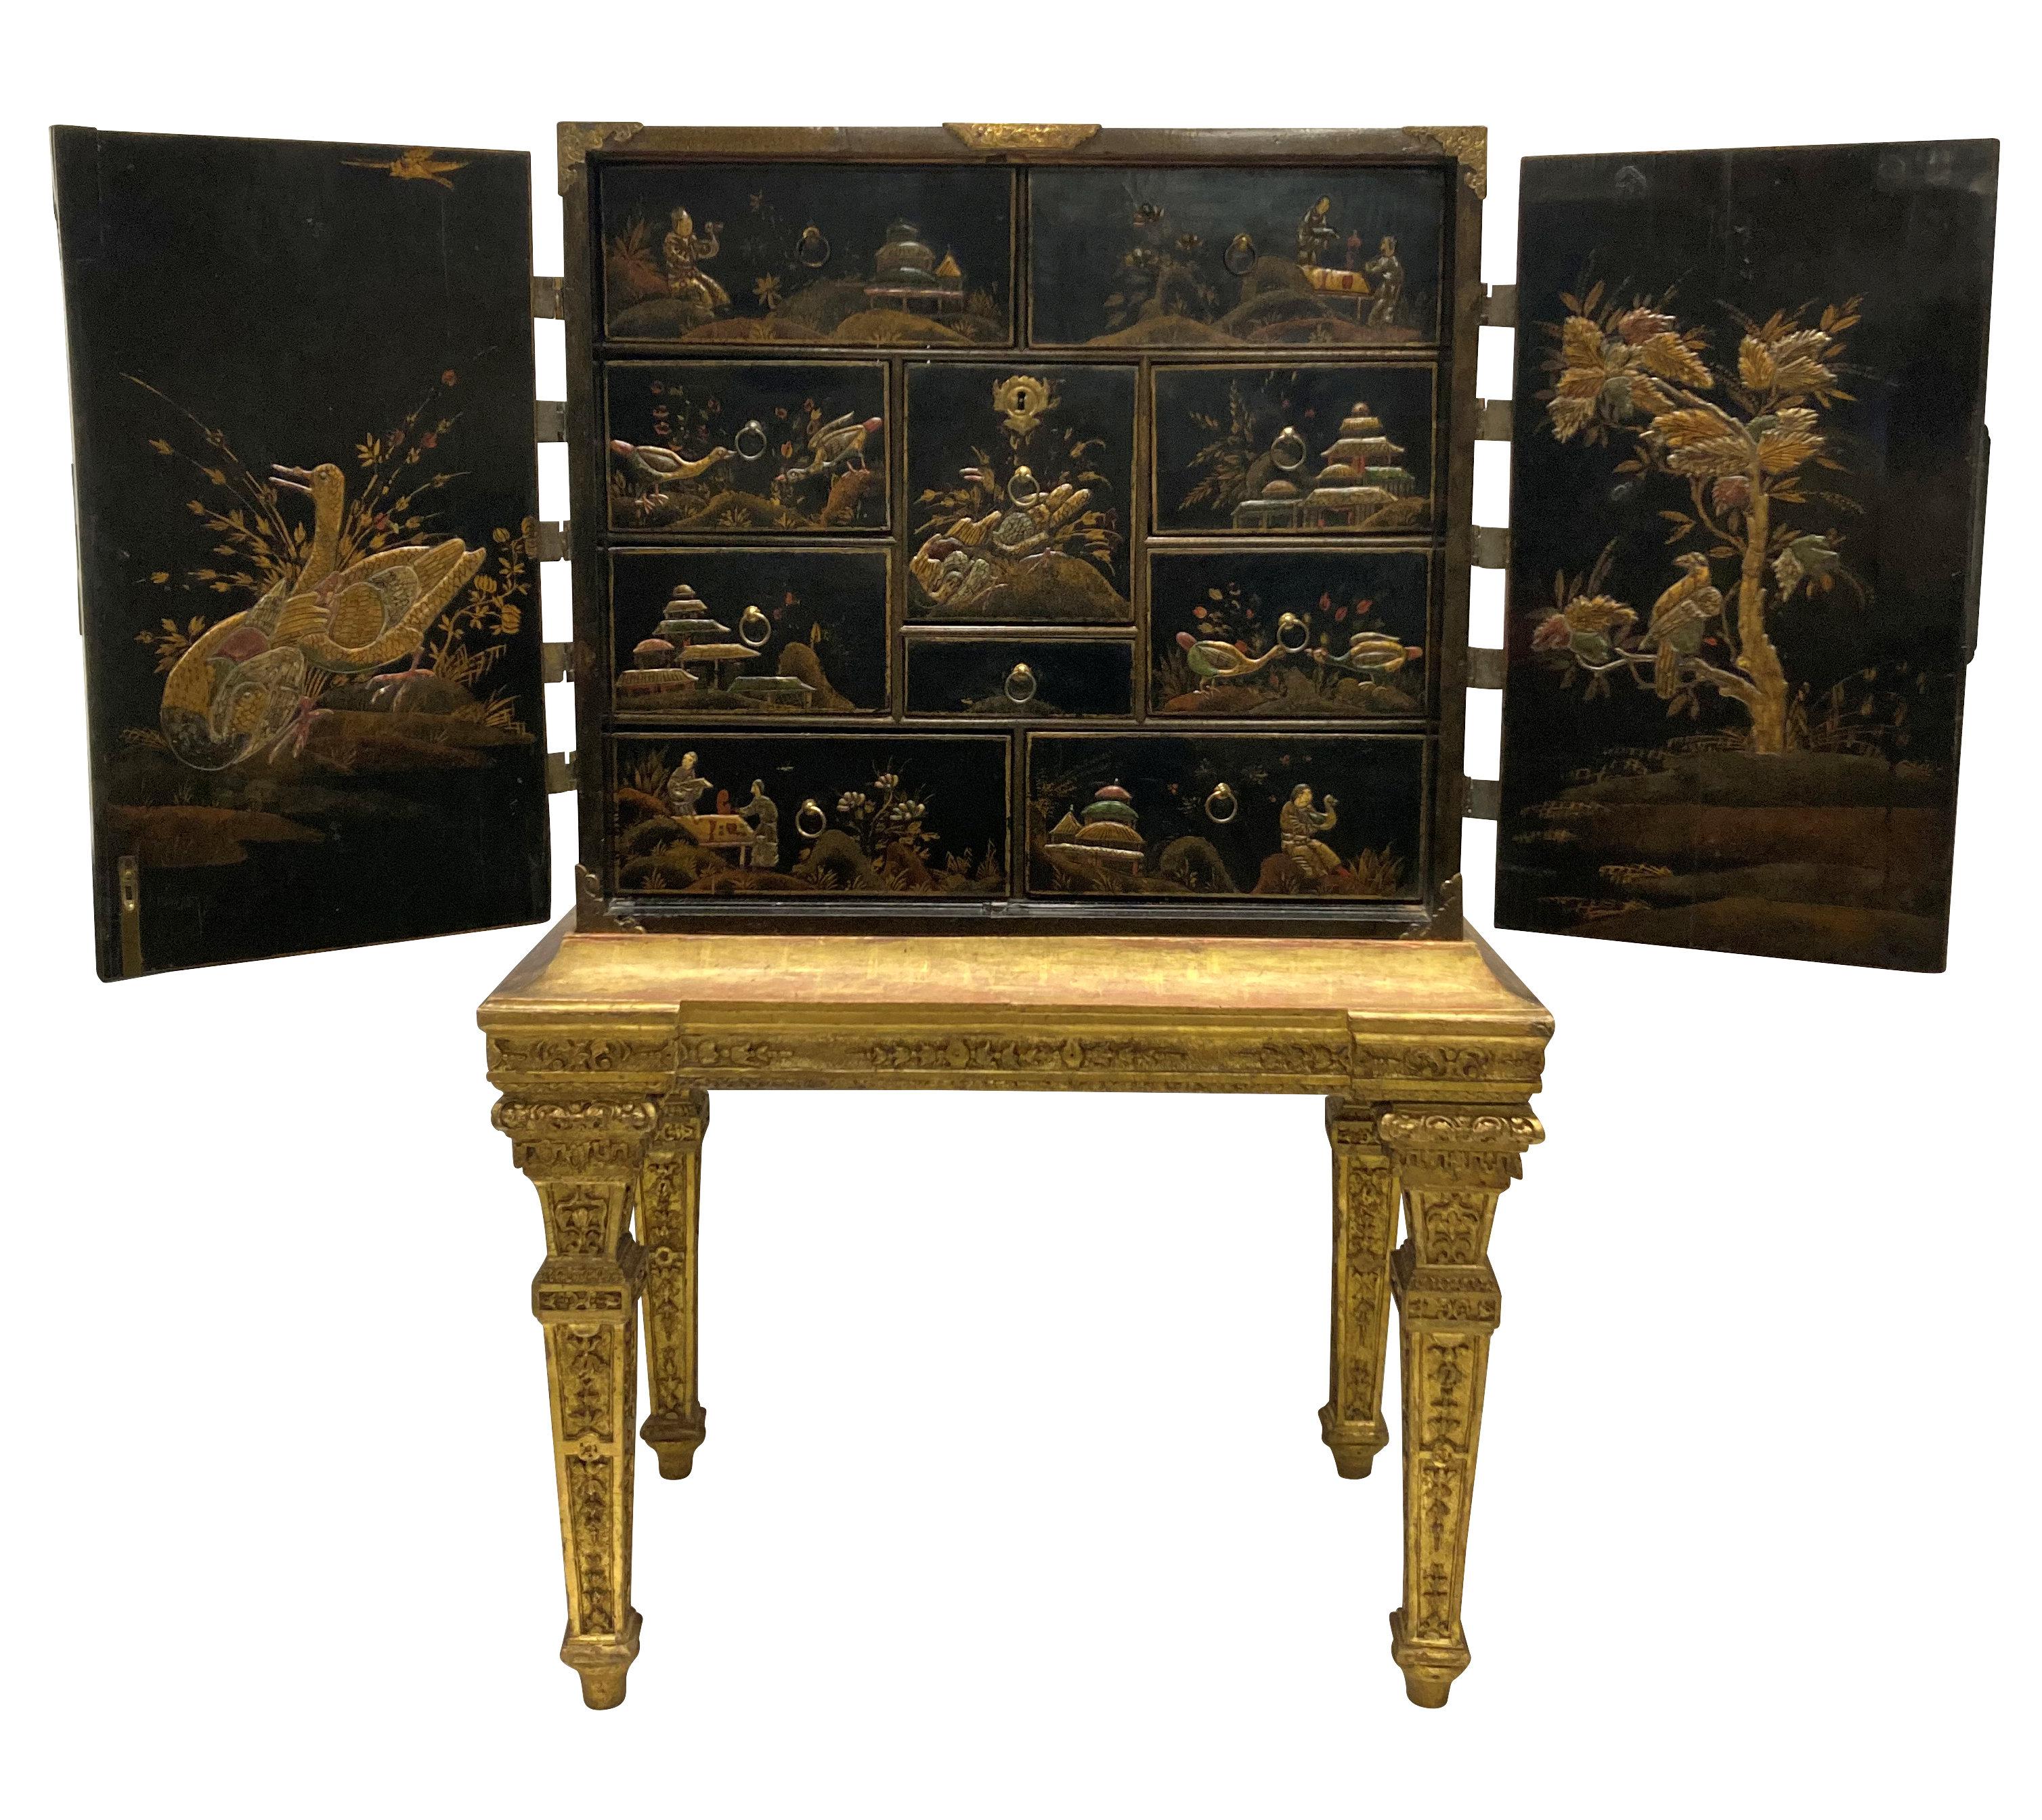 A William and Mary Gilt-Japanned Chinoiserie cabinet on gilt wood stand. The cabinet depicting Court and rural scenes, with pierced and engraved strapwork mounts and elaborate escutcheon plate with original lock and key. The interior fitted with ten